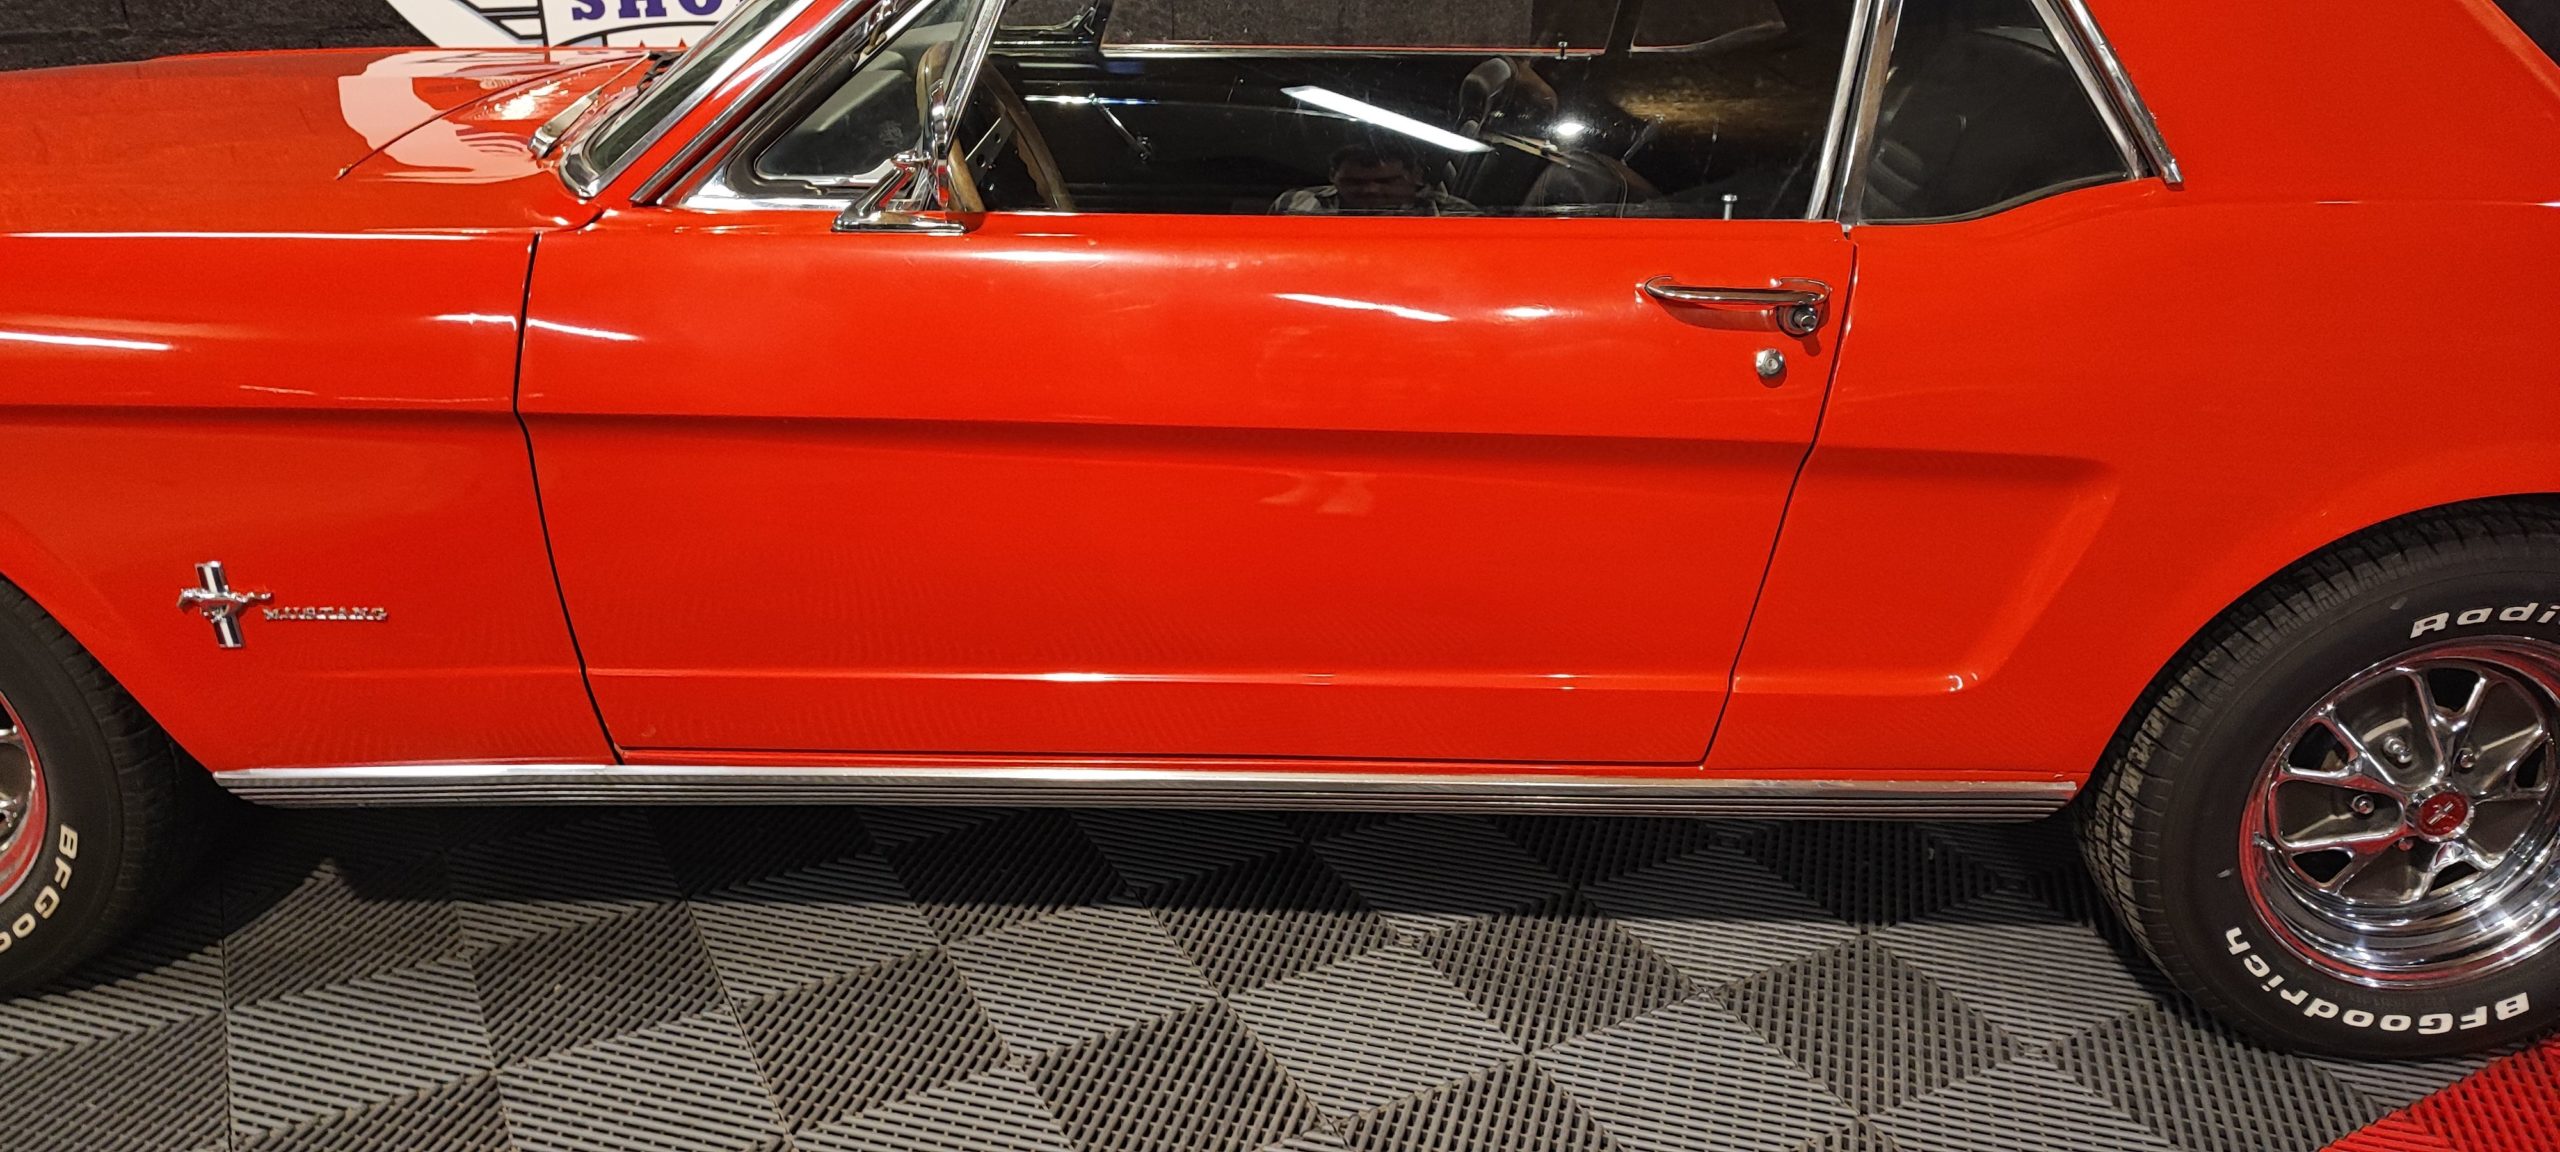 Ford Mustang Coupe – 1966